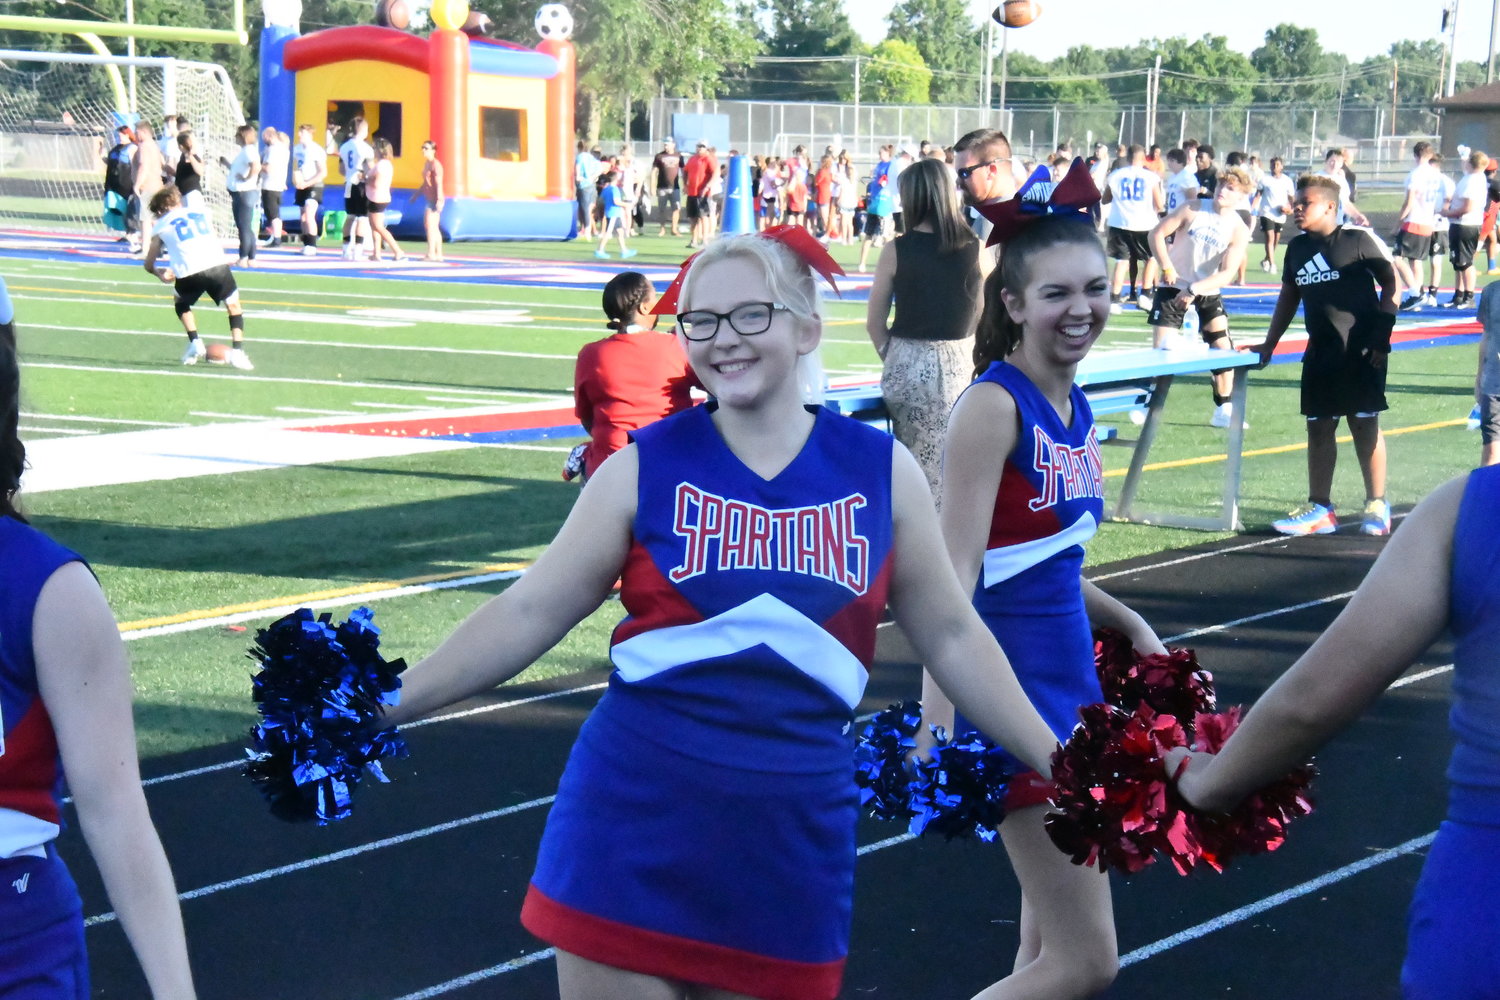 Moberly High School cheerleader Kloiee Wagner, a sophomore, smiles while invigorating fans through a routine during ‘Meet The Spartans’ Night.